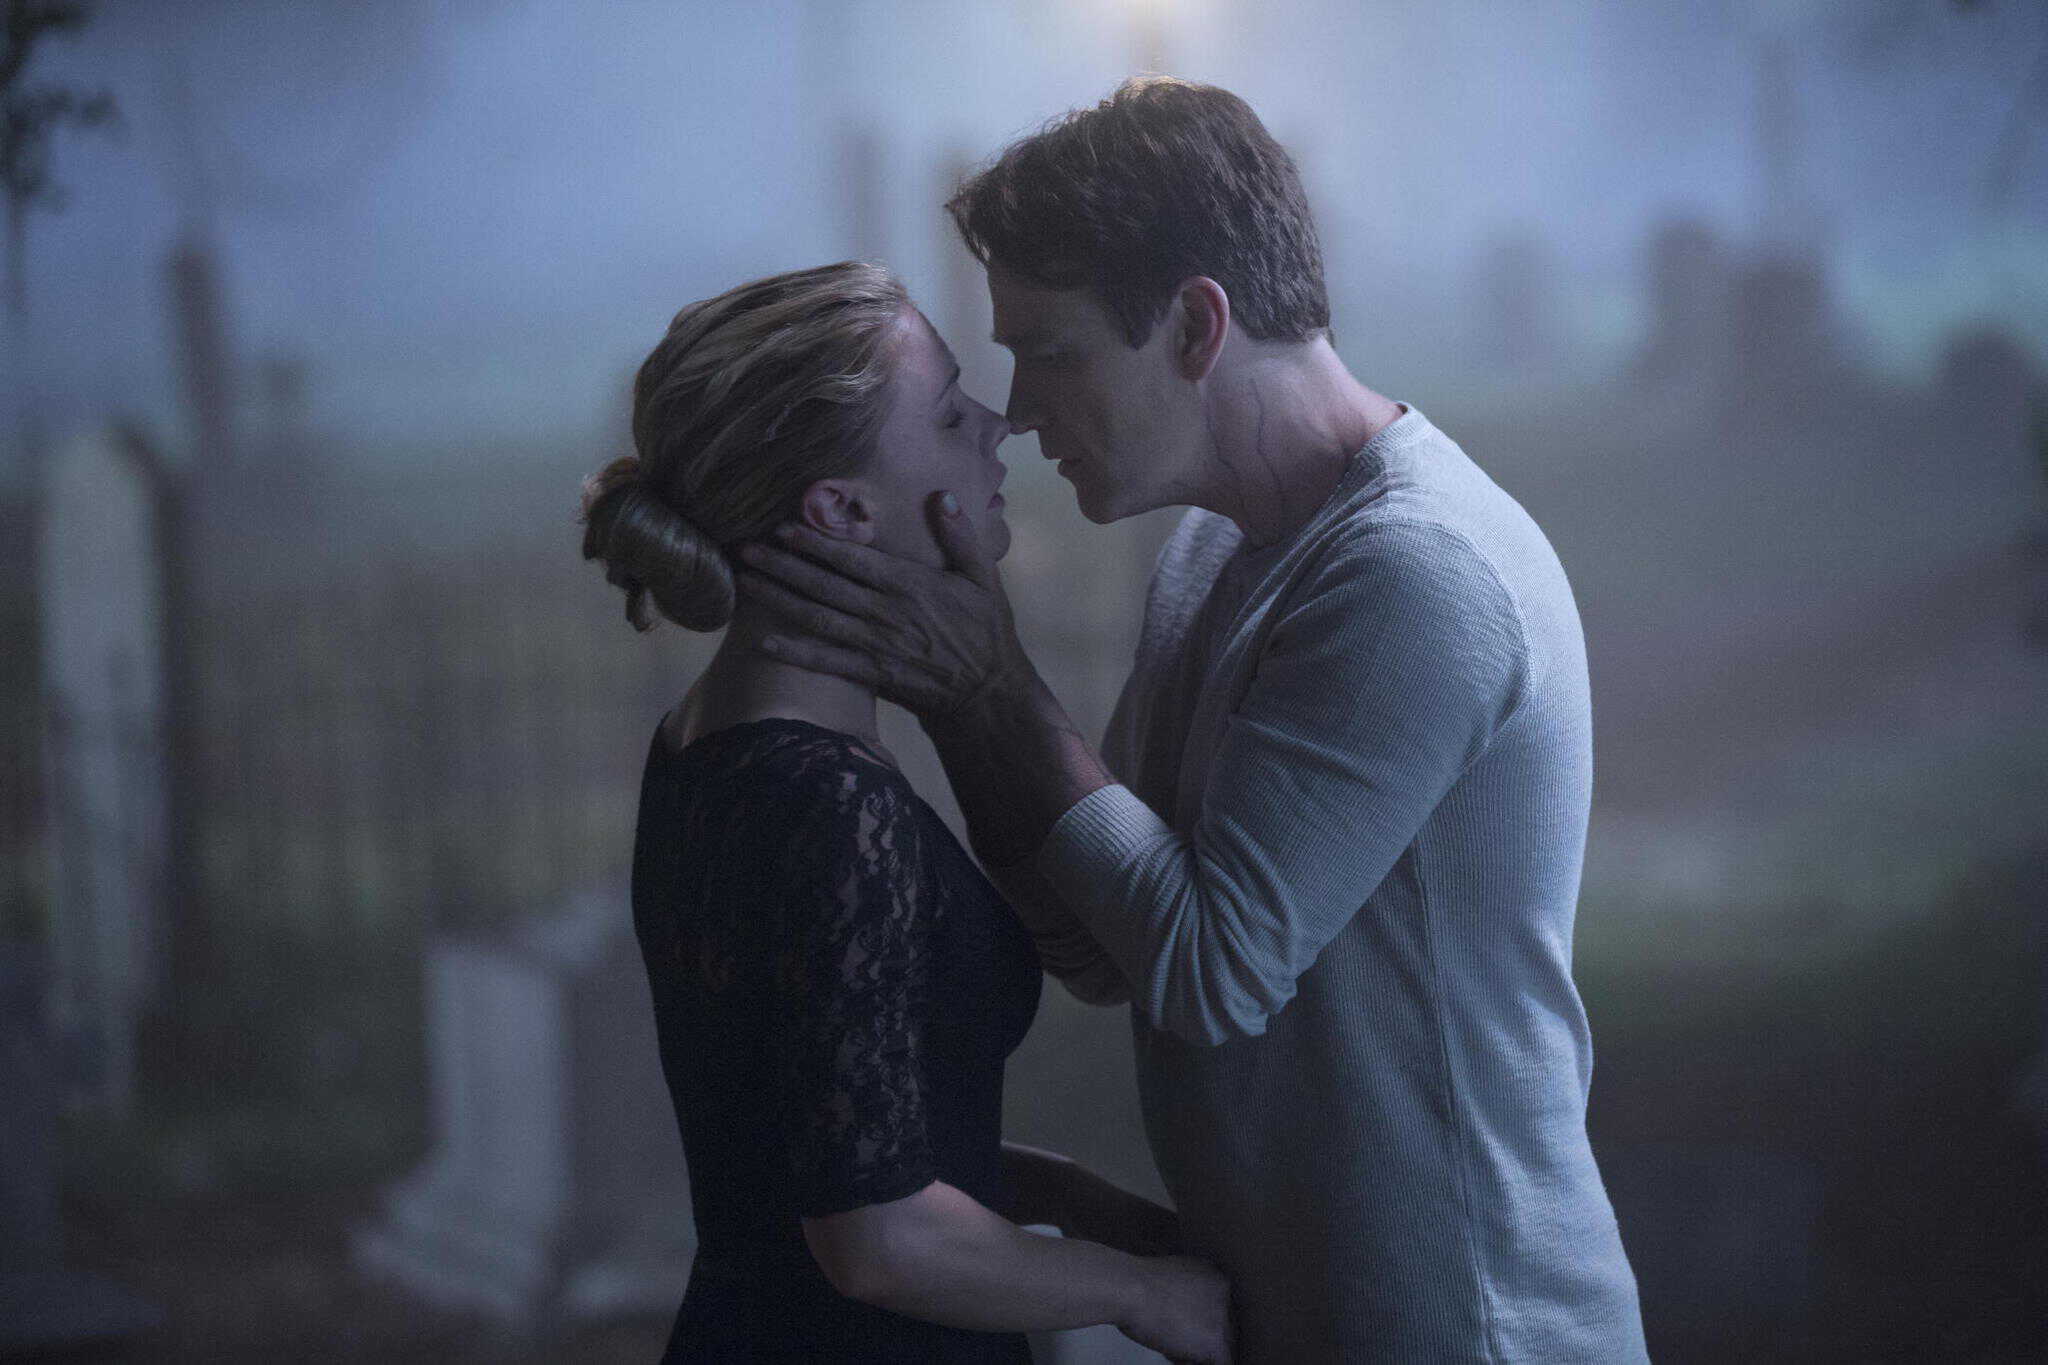 A woman and a man lean in for a kiss in this image from HBO Entertainment.